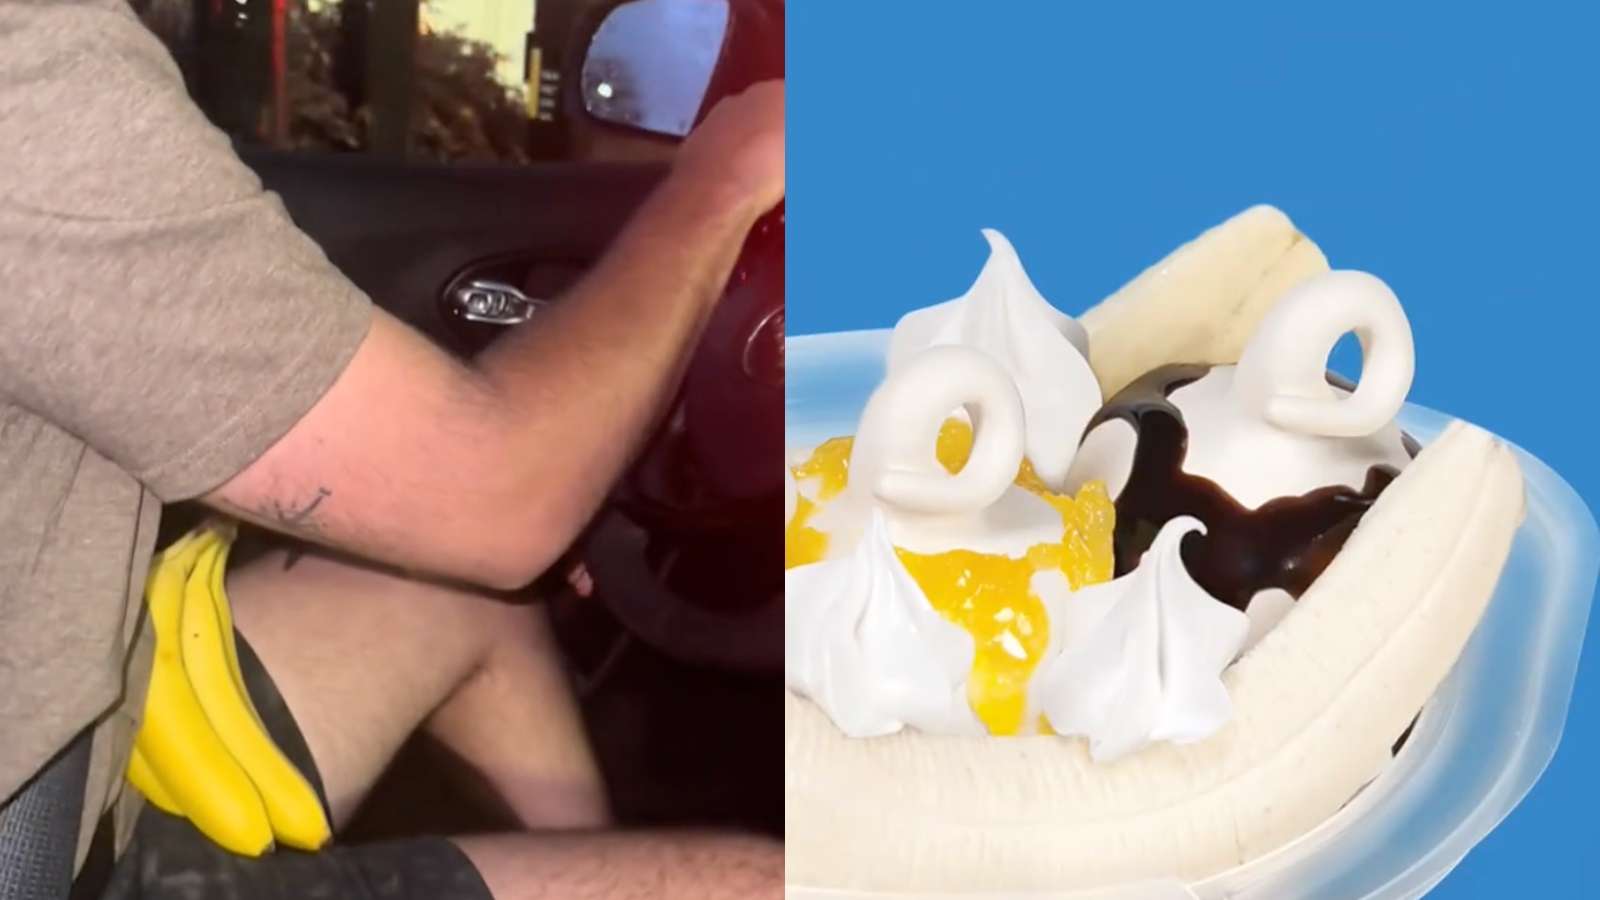 Man takes banana to Dairy Queen